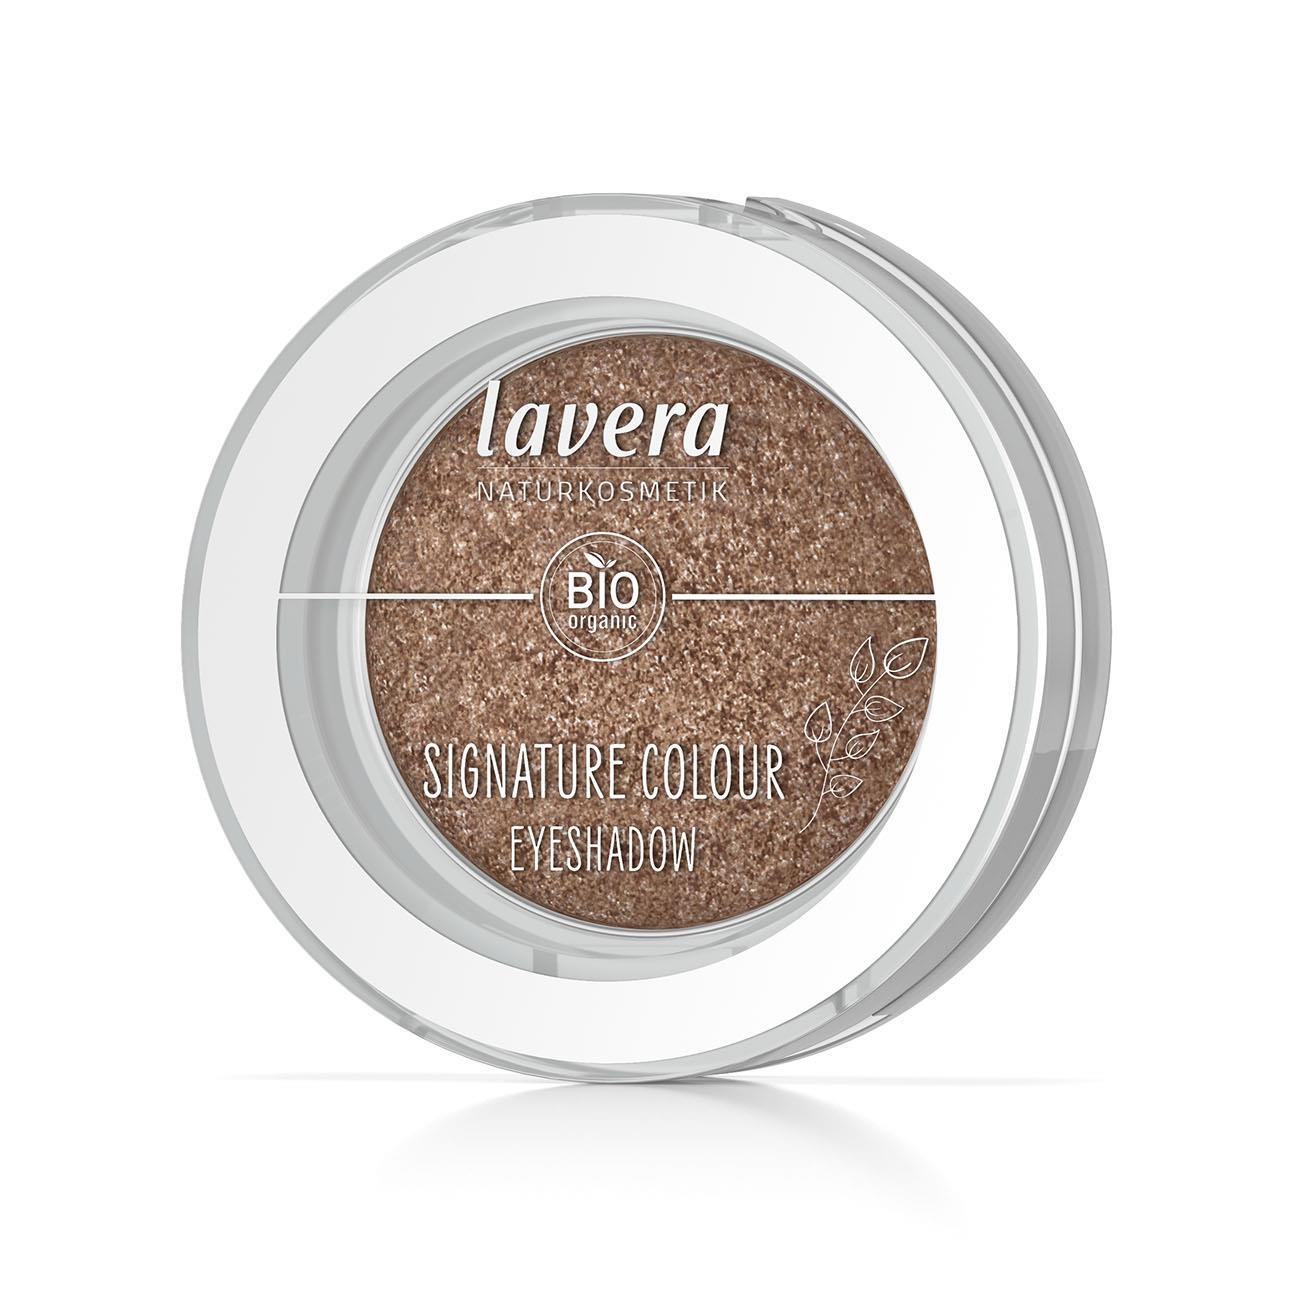 Organic Space Gold 08 Signature Colour Eyeshadow 1.5g